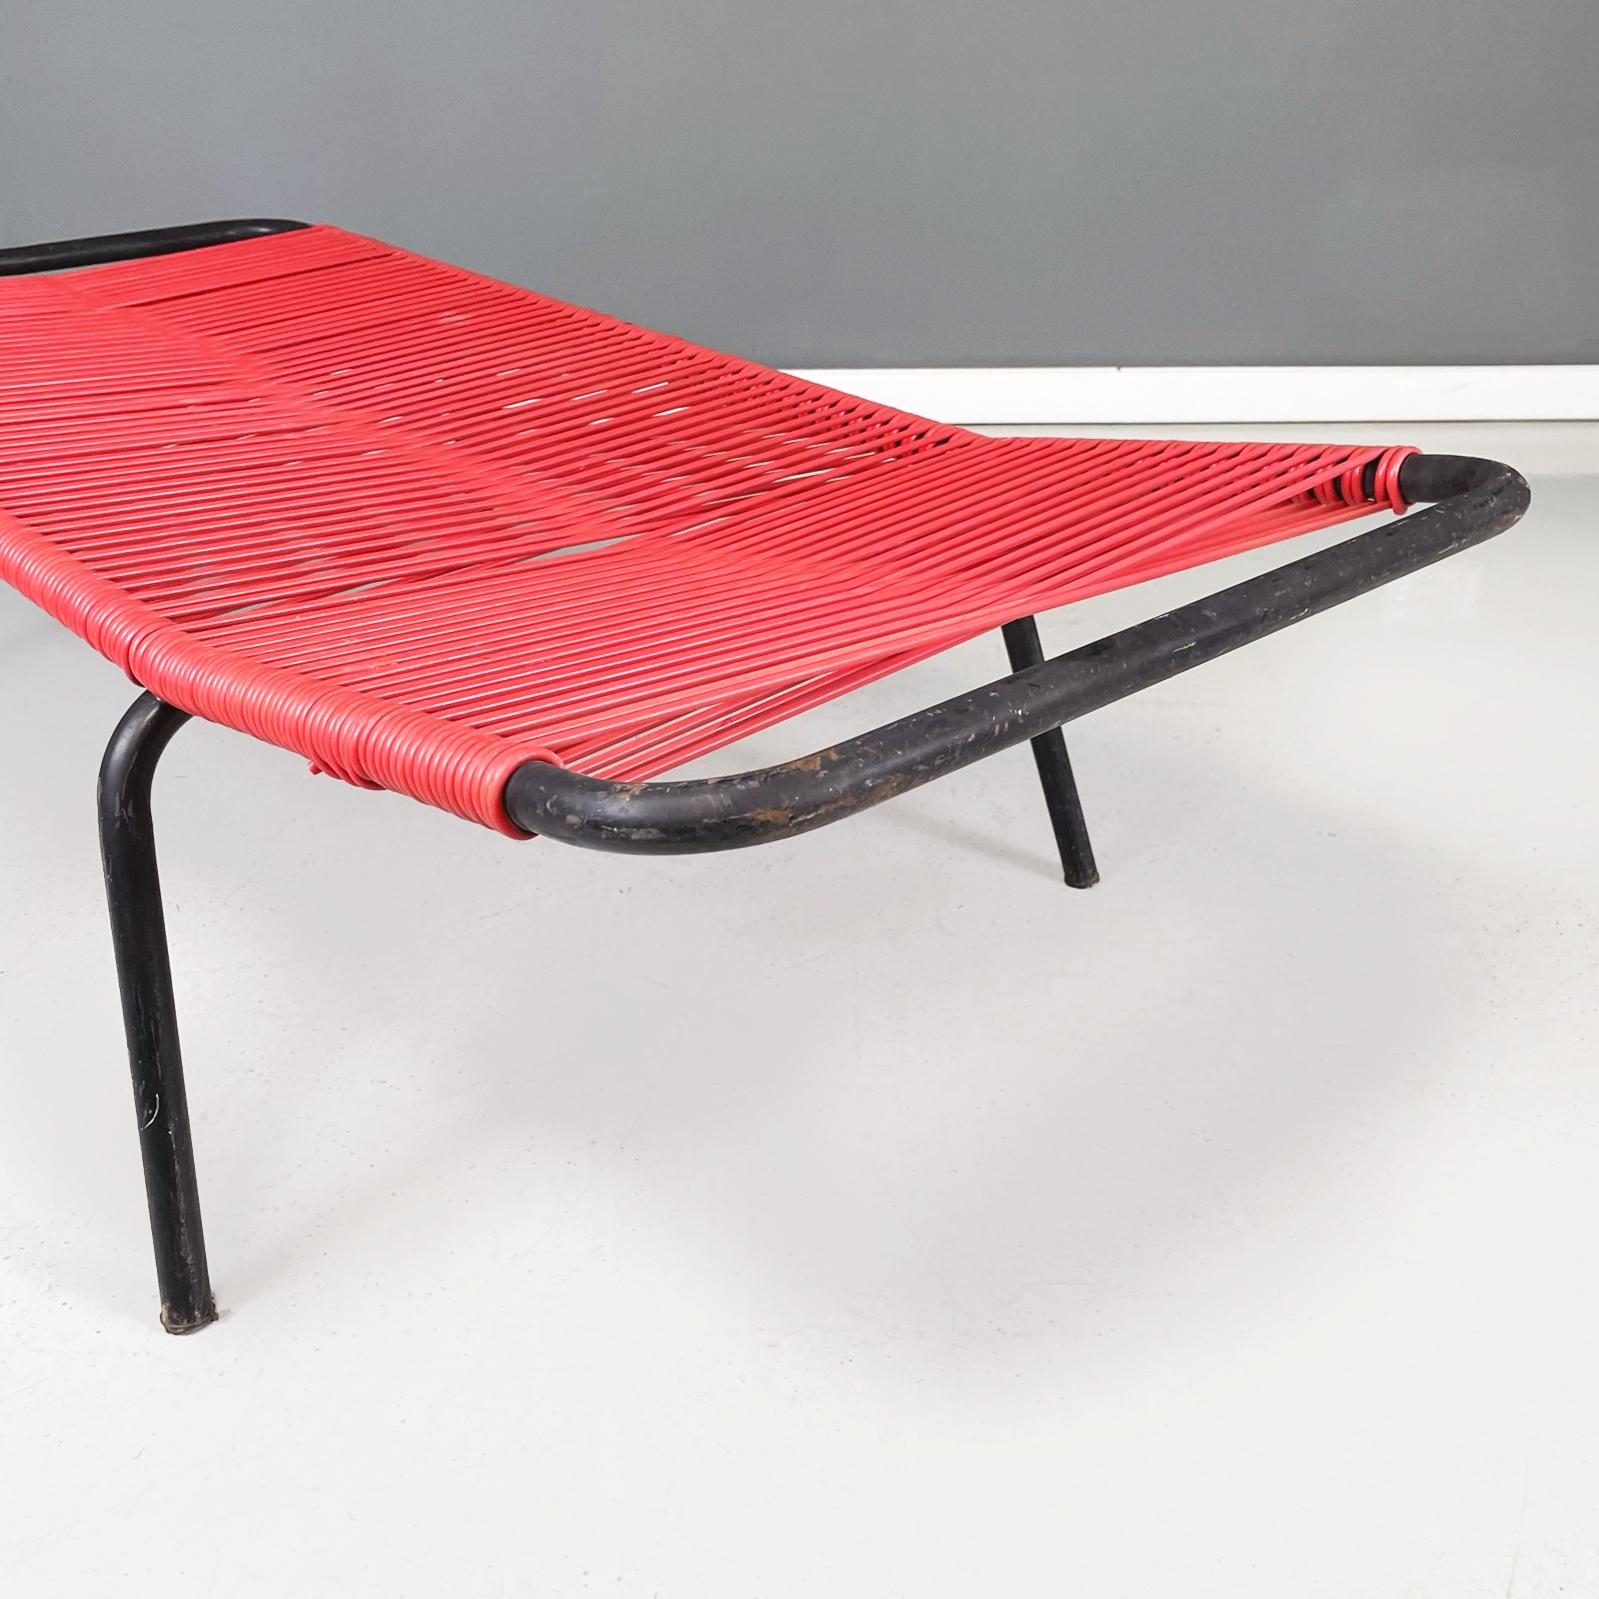 Mid-20th Century Italian Midcentury Beach Chair in Red Scooby Plastic and Black Metal, 1960s